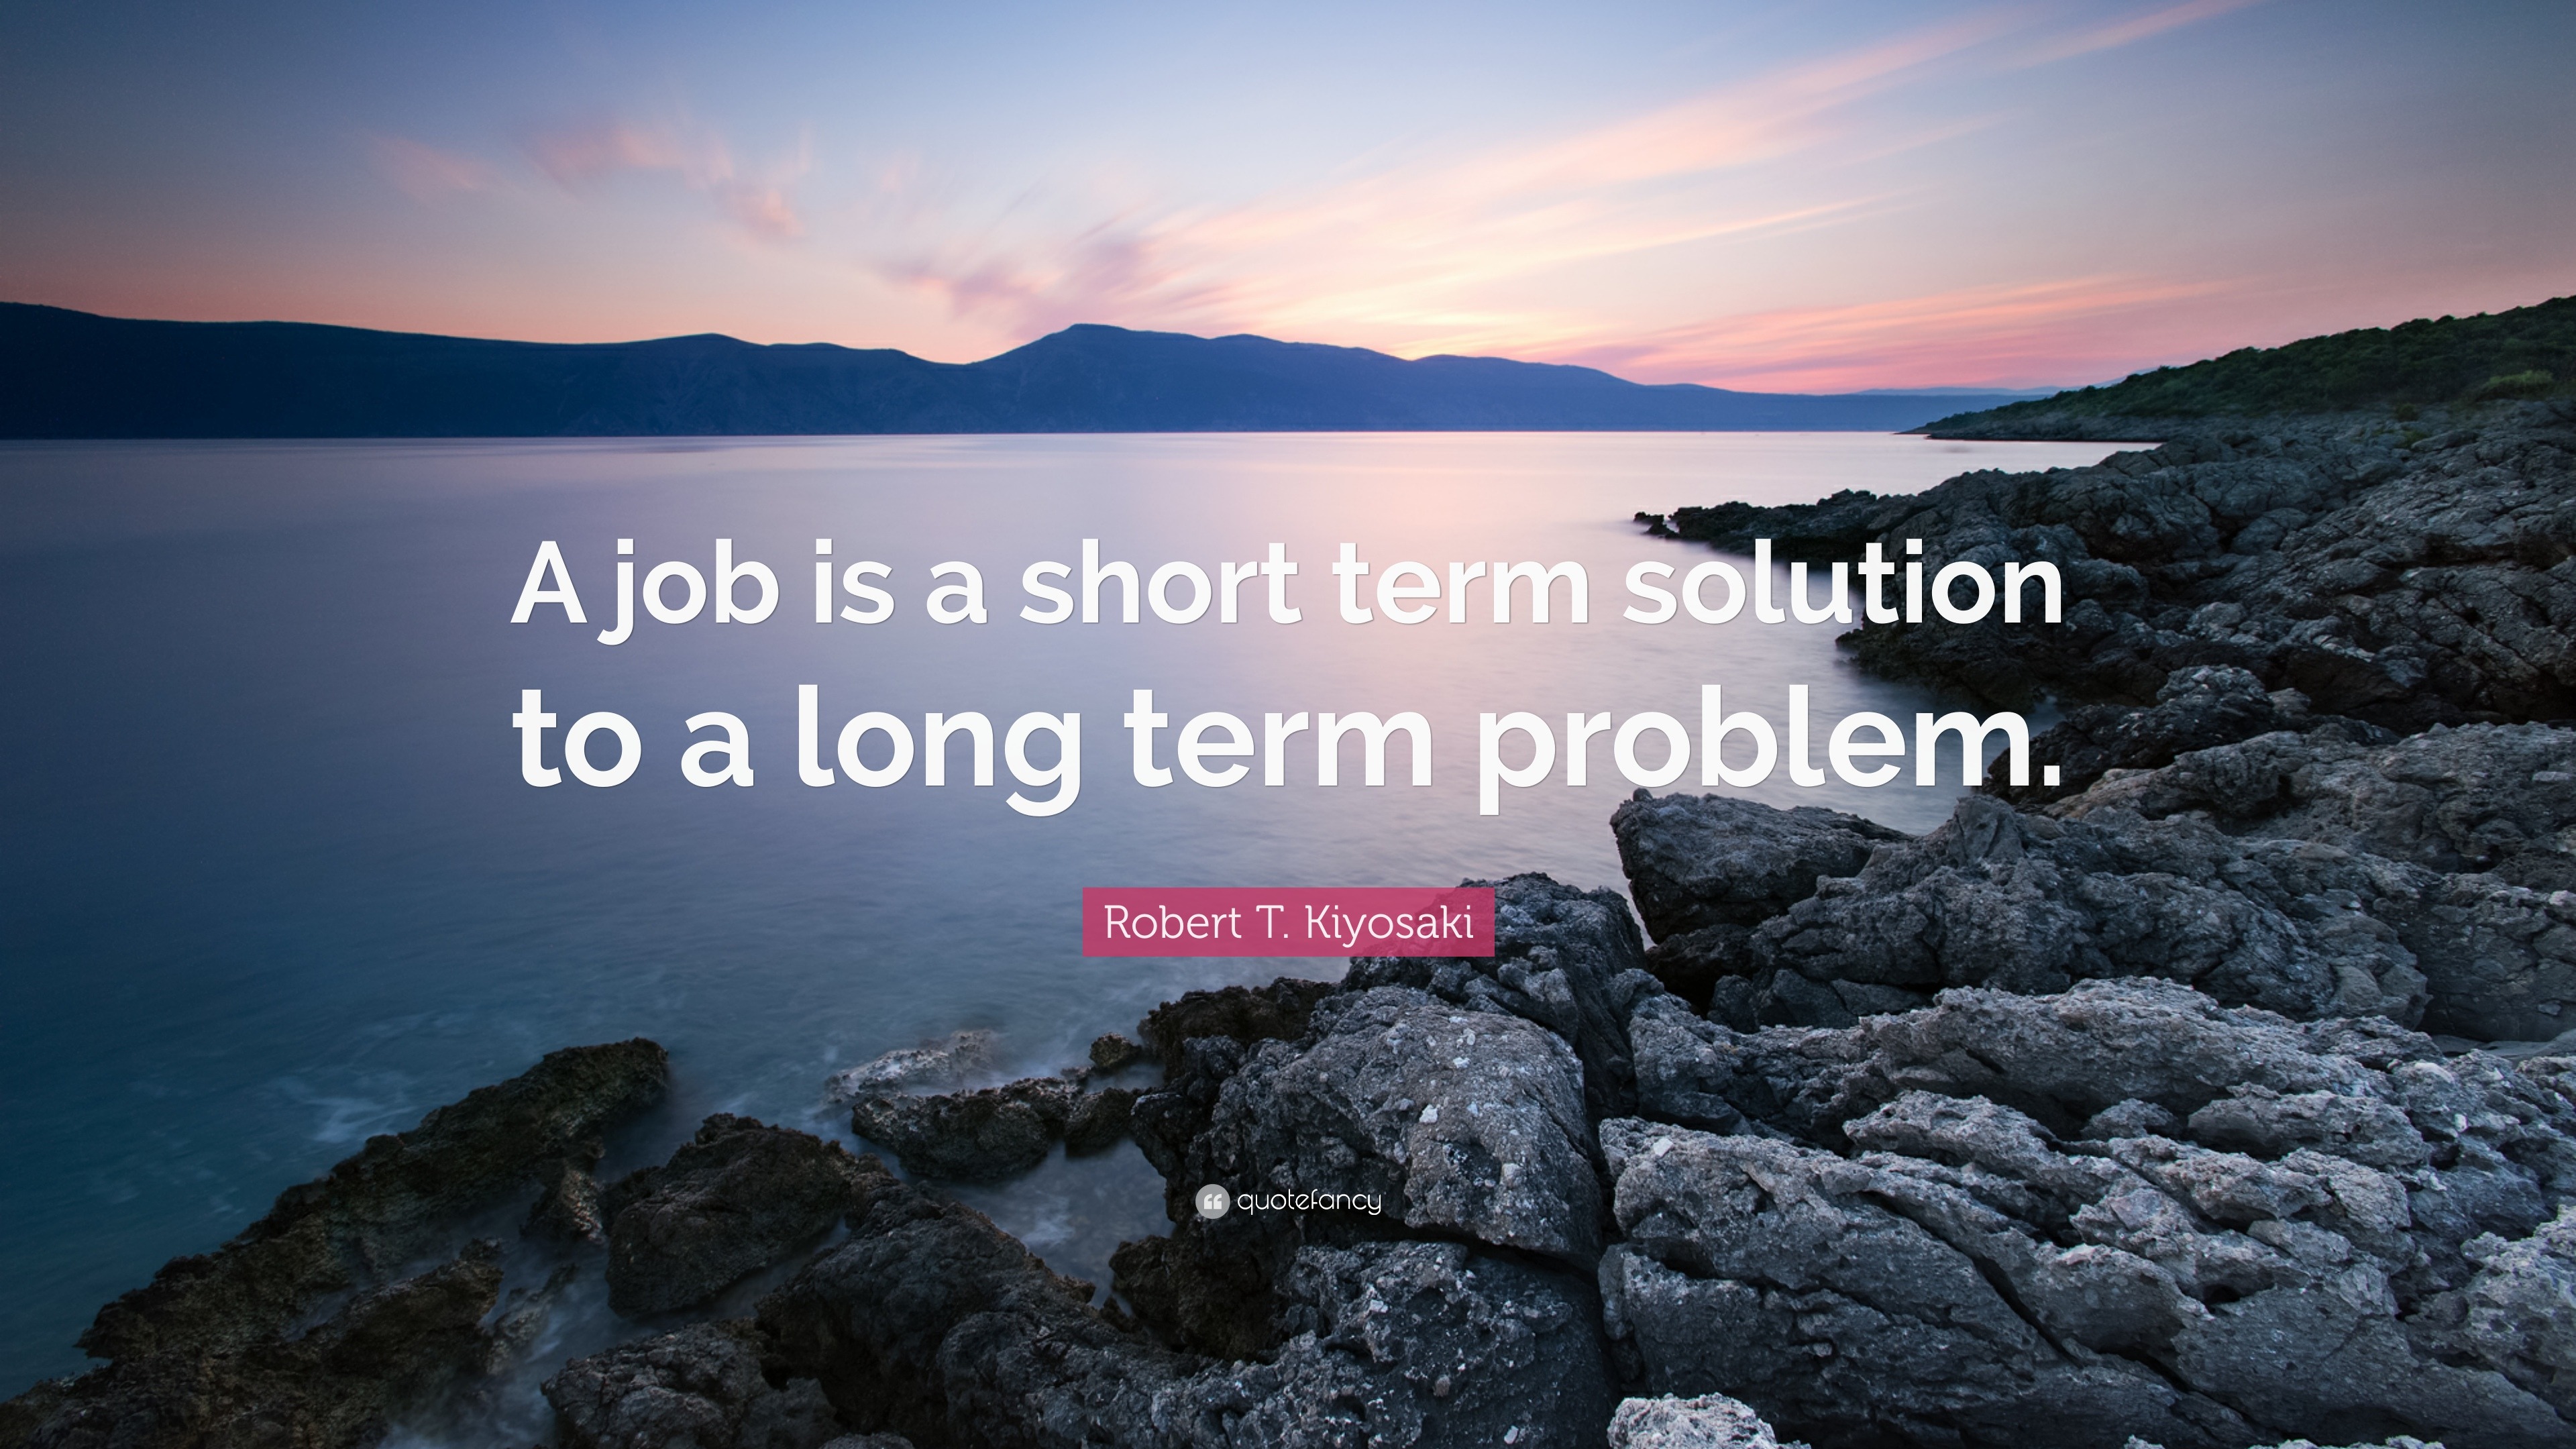 Robert T. Kiyosaki Quote: “A job is a short term solution to a